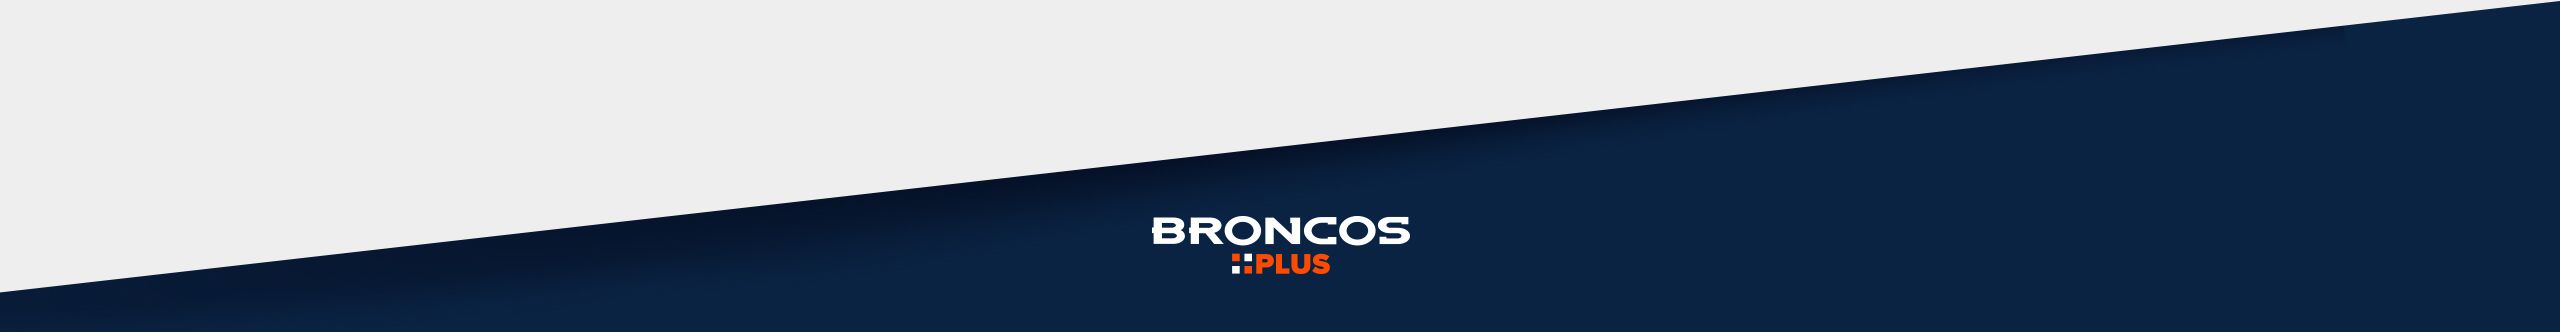 Broncos introduce new payment options for season ticket holders – The  Denver Post